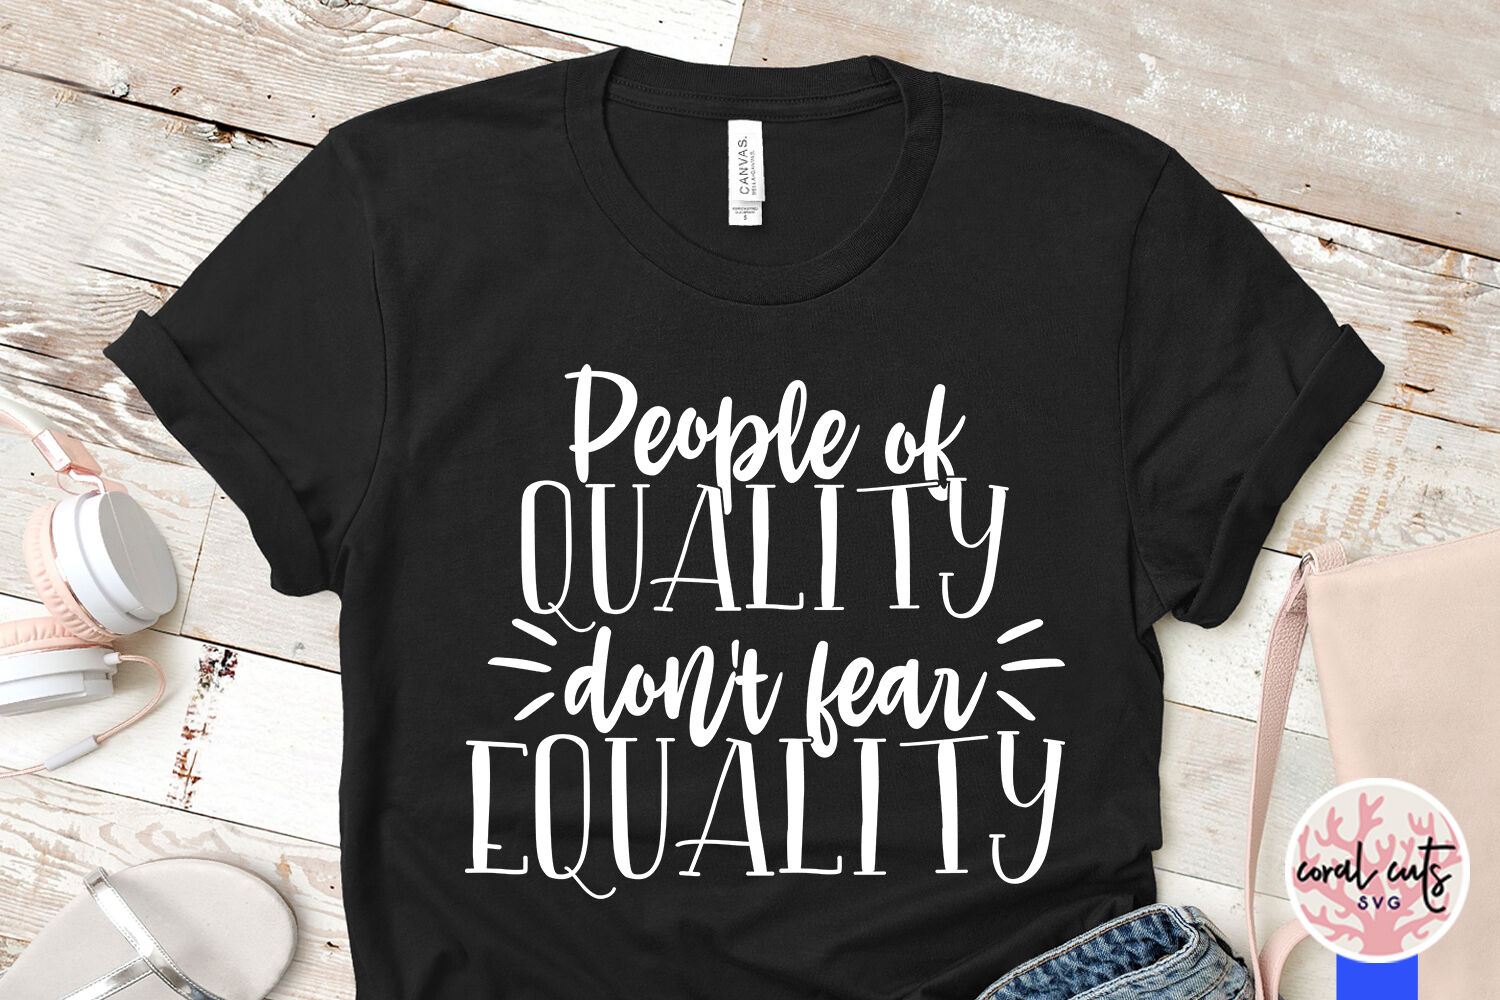 People of quality don't fear equality - Women Empowerment SVG EPS DXF ...